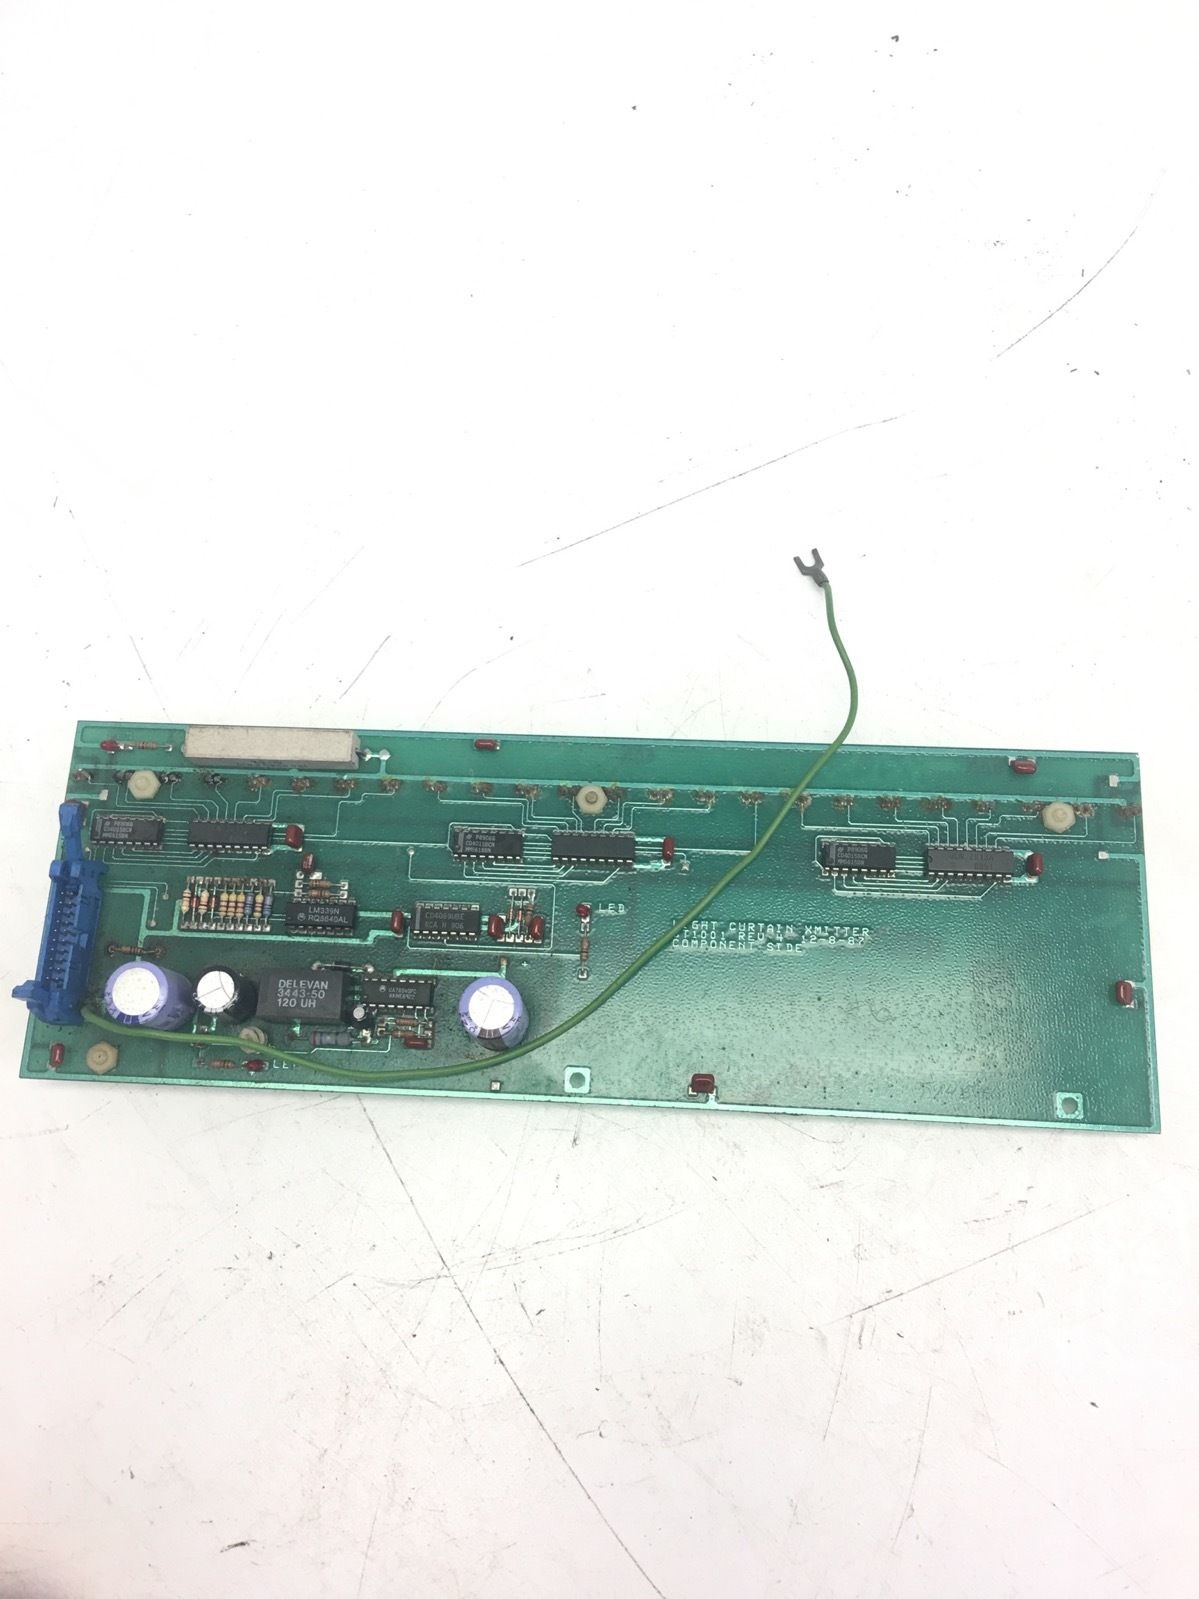 USED LIGHT CURTAIN XMITTER CIRCUIT CARD, ST1001 REVISION 4, FAST SHIP, B273 1